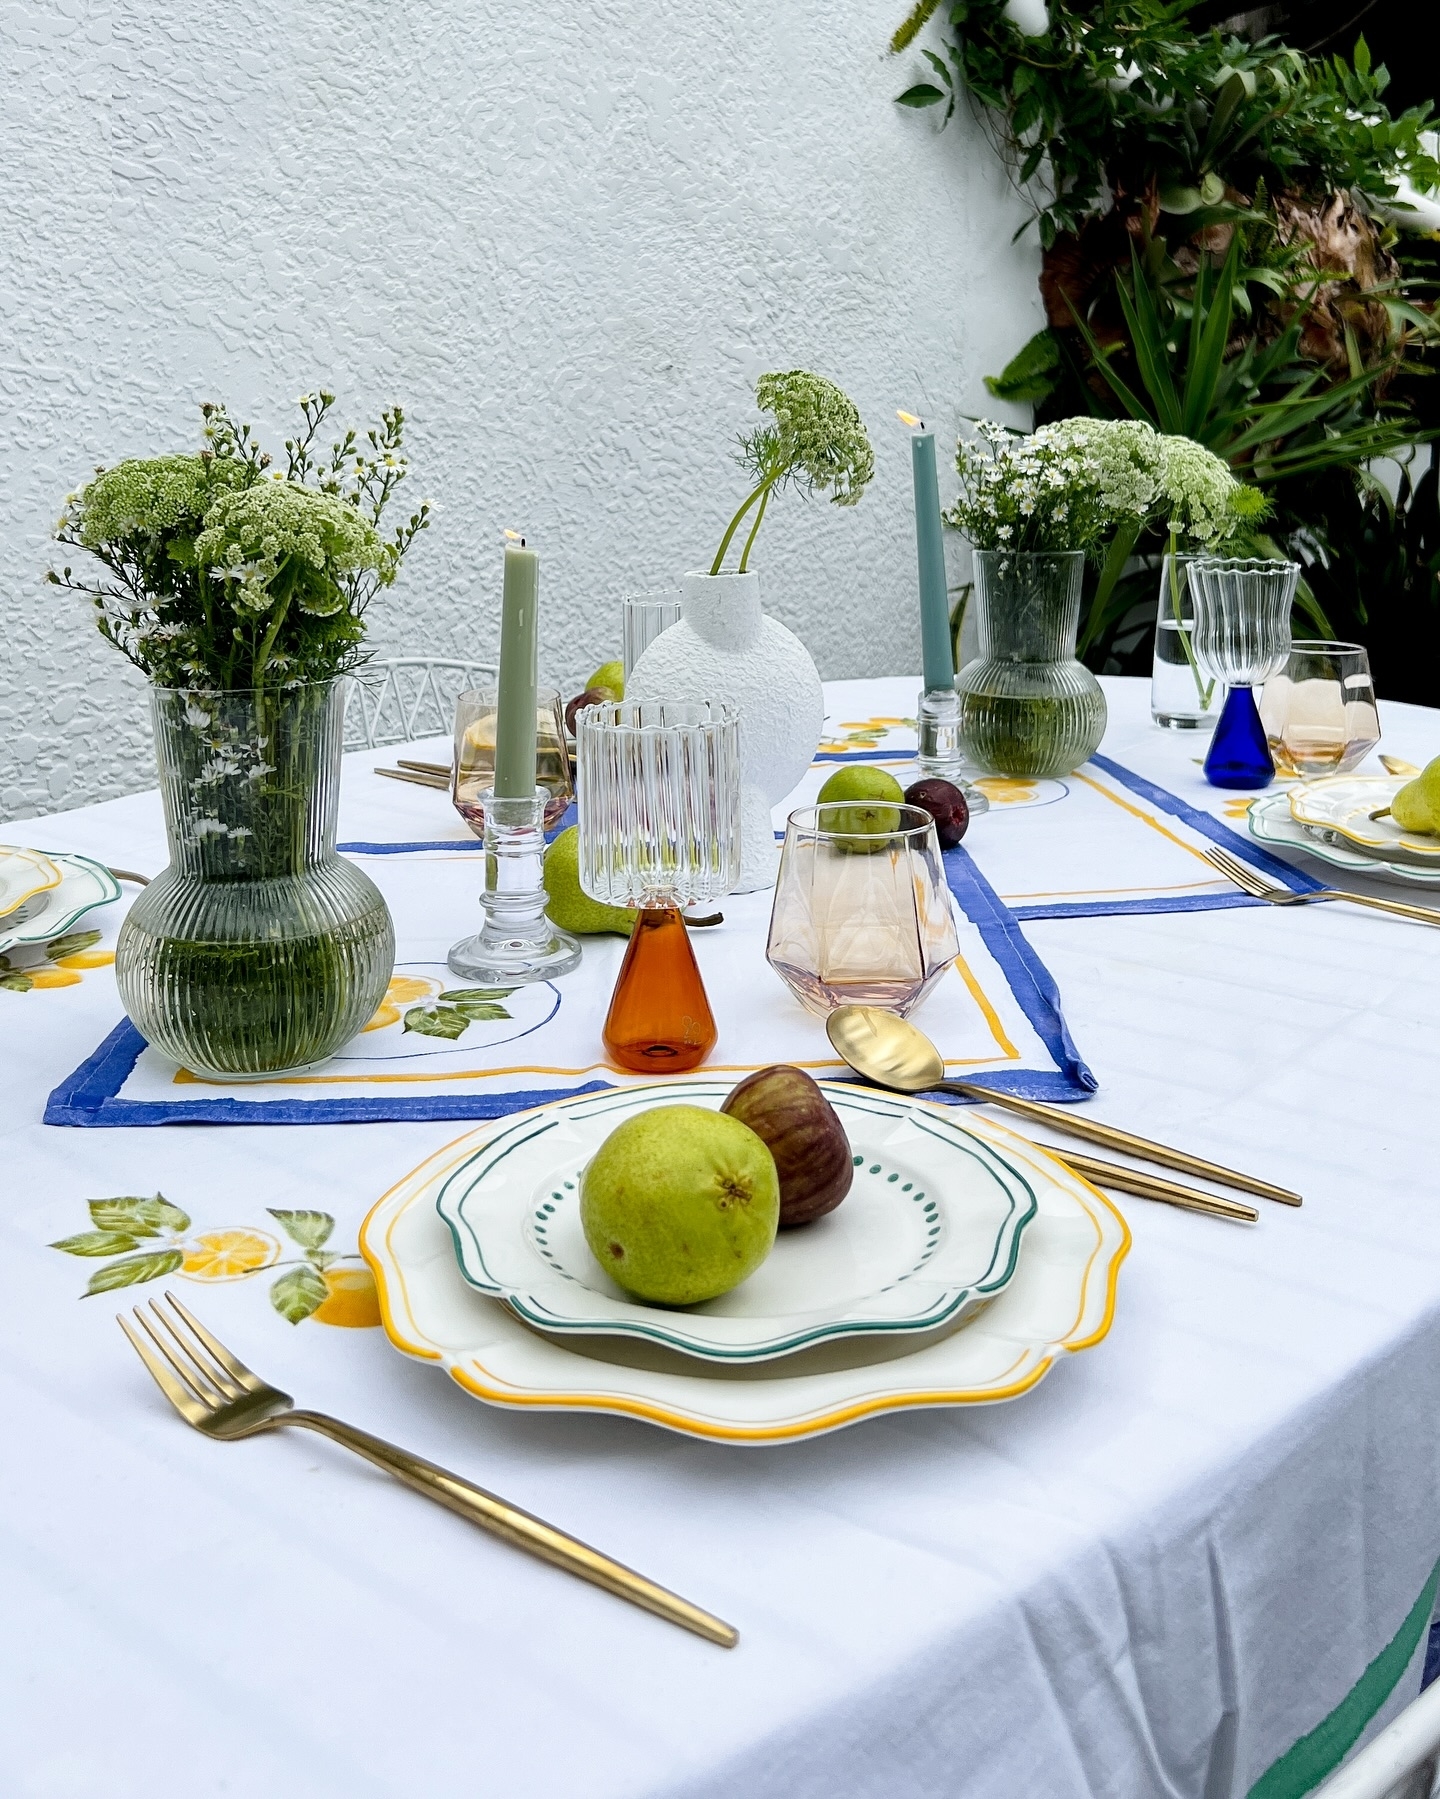 Elegantly set table with tableware, glassware, and a centerpiece for sophisticated outdoor dining